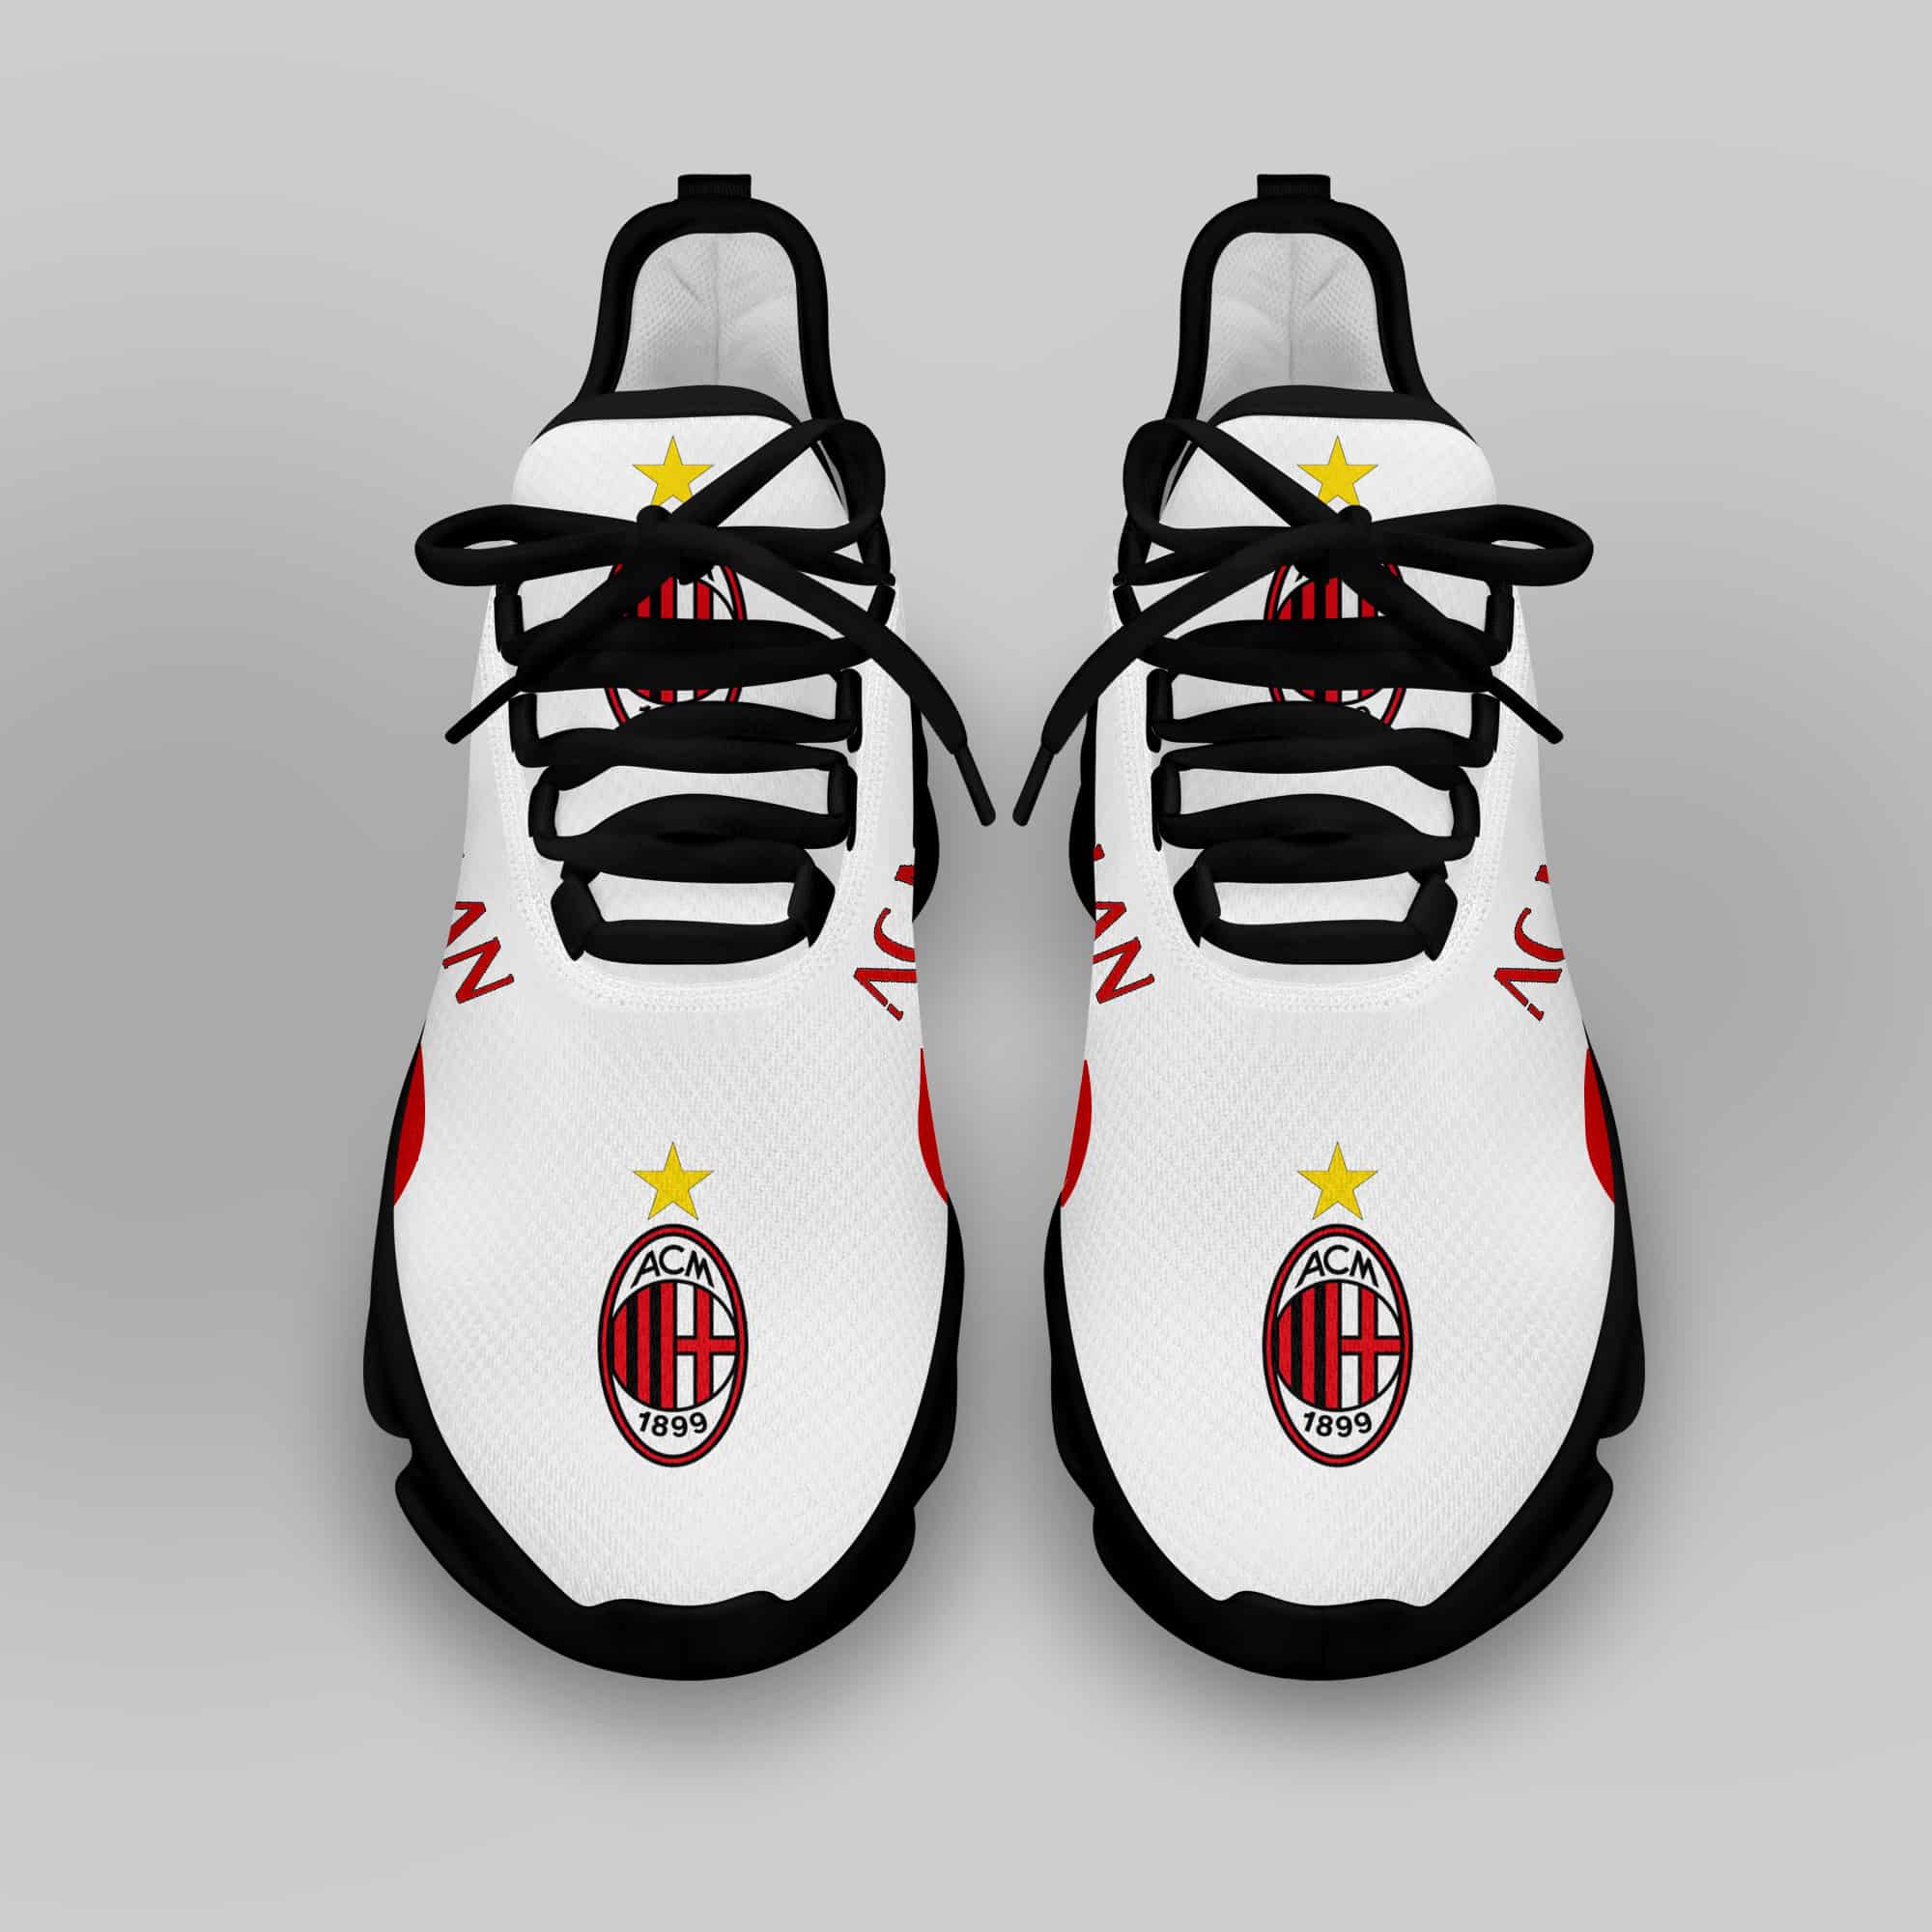 Ac Milan Running Shoes Max Soul Shoes Sneakers Ver 4 4